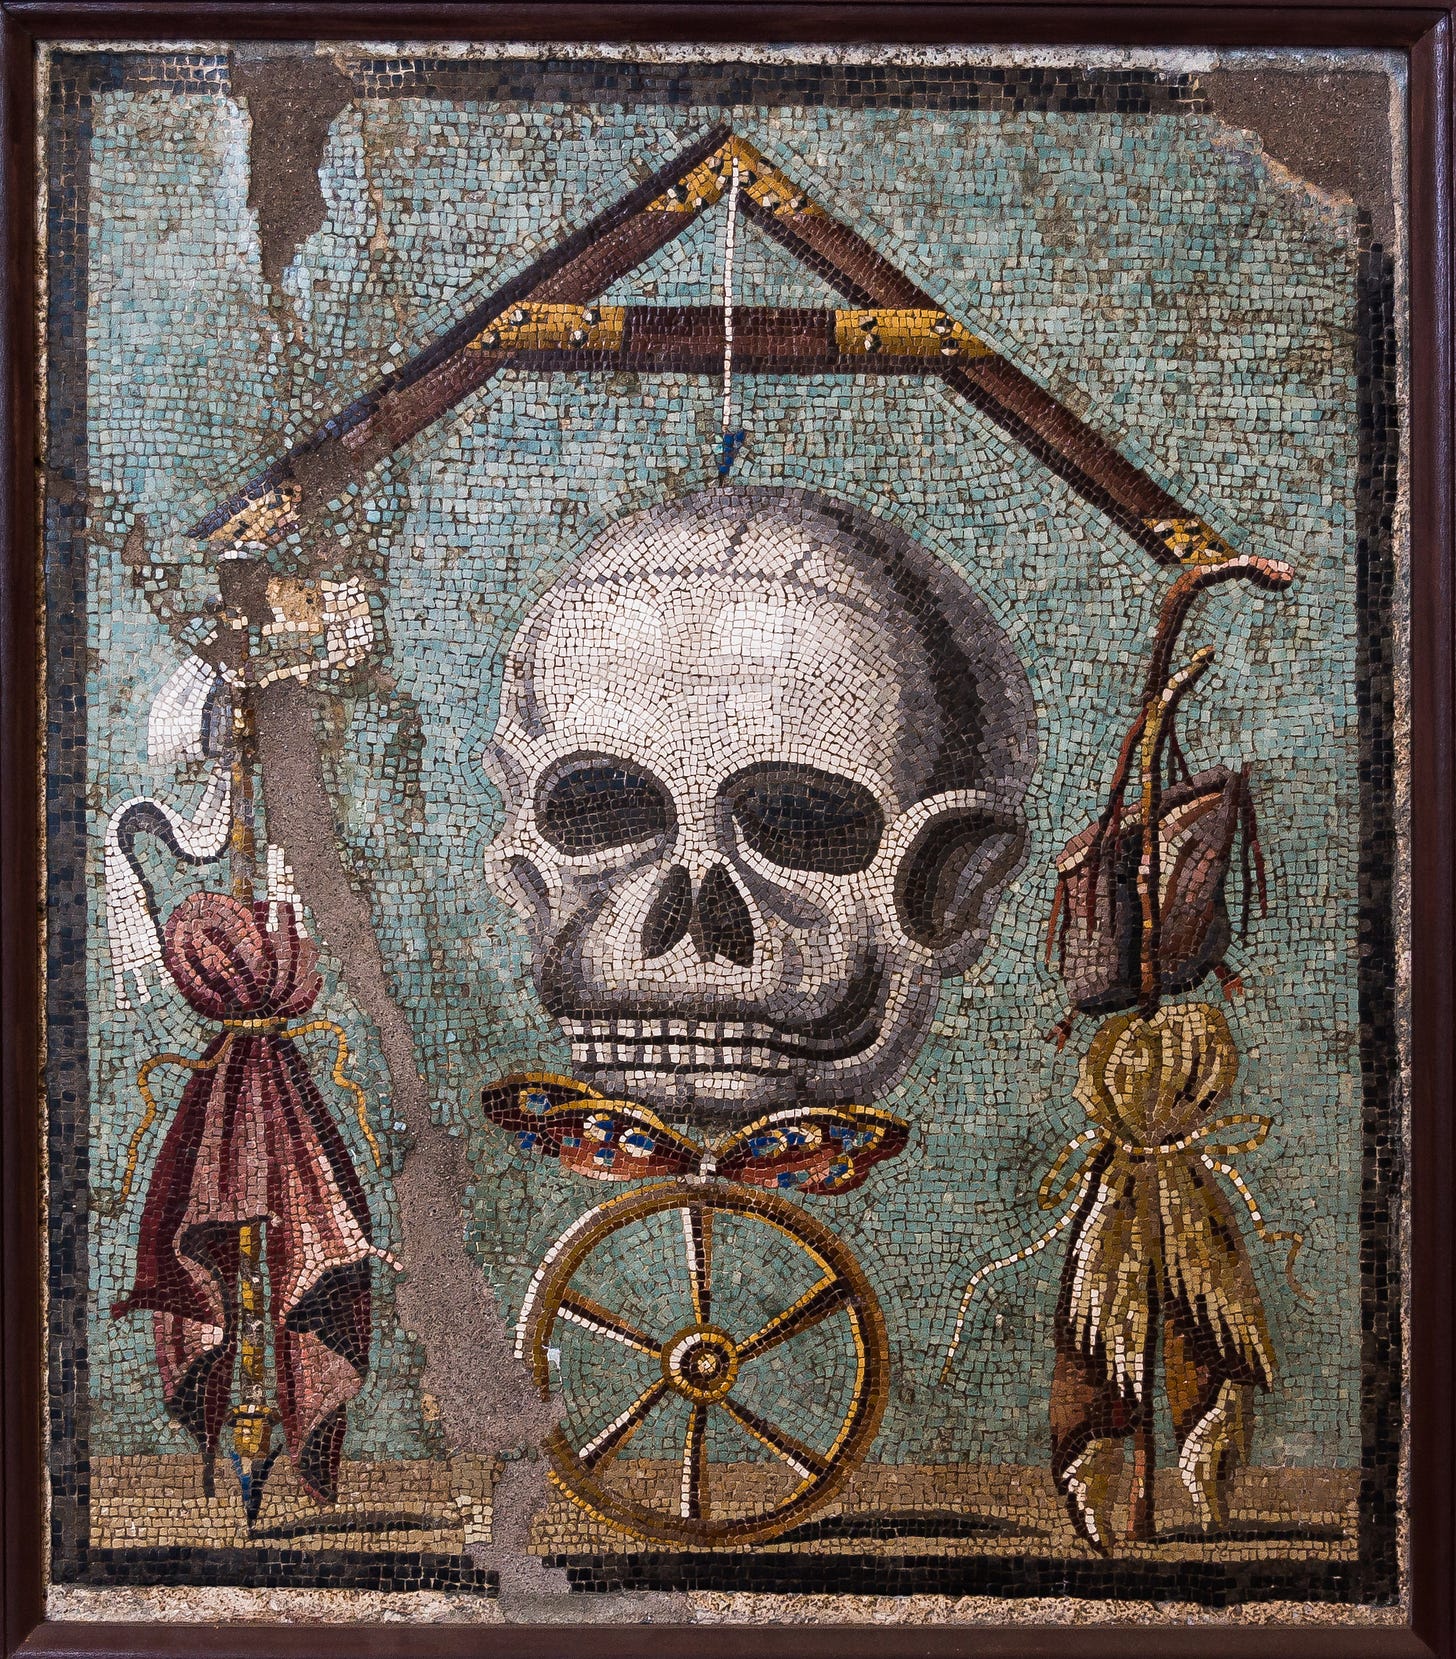 A mosaic of a skull from a frieze recovered from the Pompeii volcano eruption. The weight is death (the skull) below which are a butterfly (the soul) and a wheel (fortune). On each side, suspended from the arms of the level and kept in perfect balance by death, are the symbols of wealth and power on the left (the sceptre and purple) and poverty on the right (the beggar’s scrip and stick). The theme, like the skeletons on the silverware in the treasure of Boscoreale, was intended to remind diners of the fleeting nature of earthly fortunes.